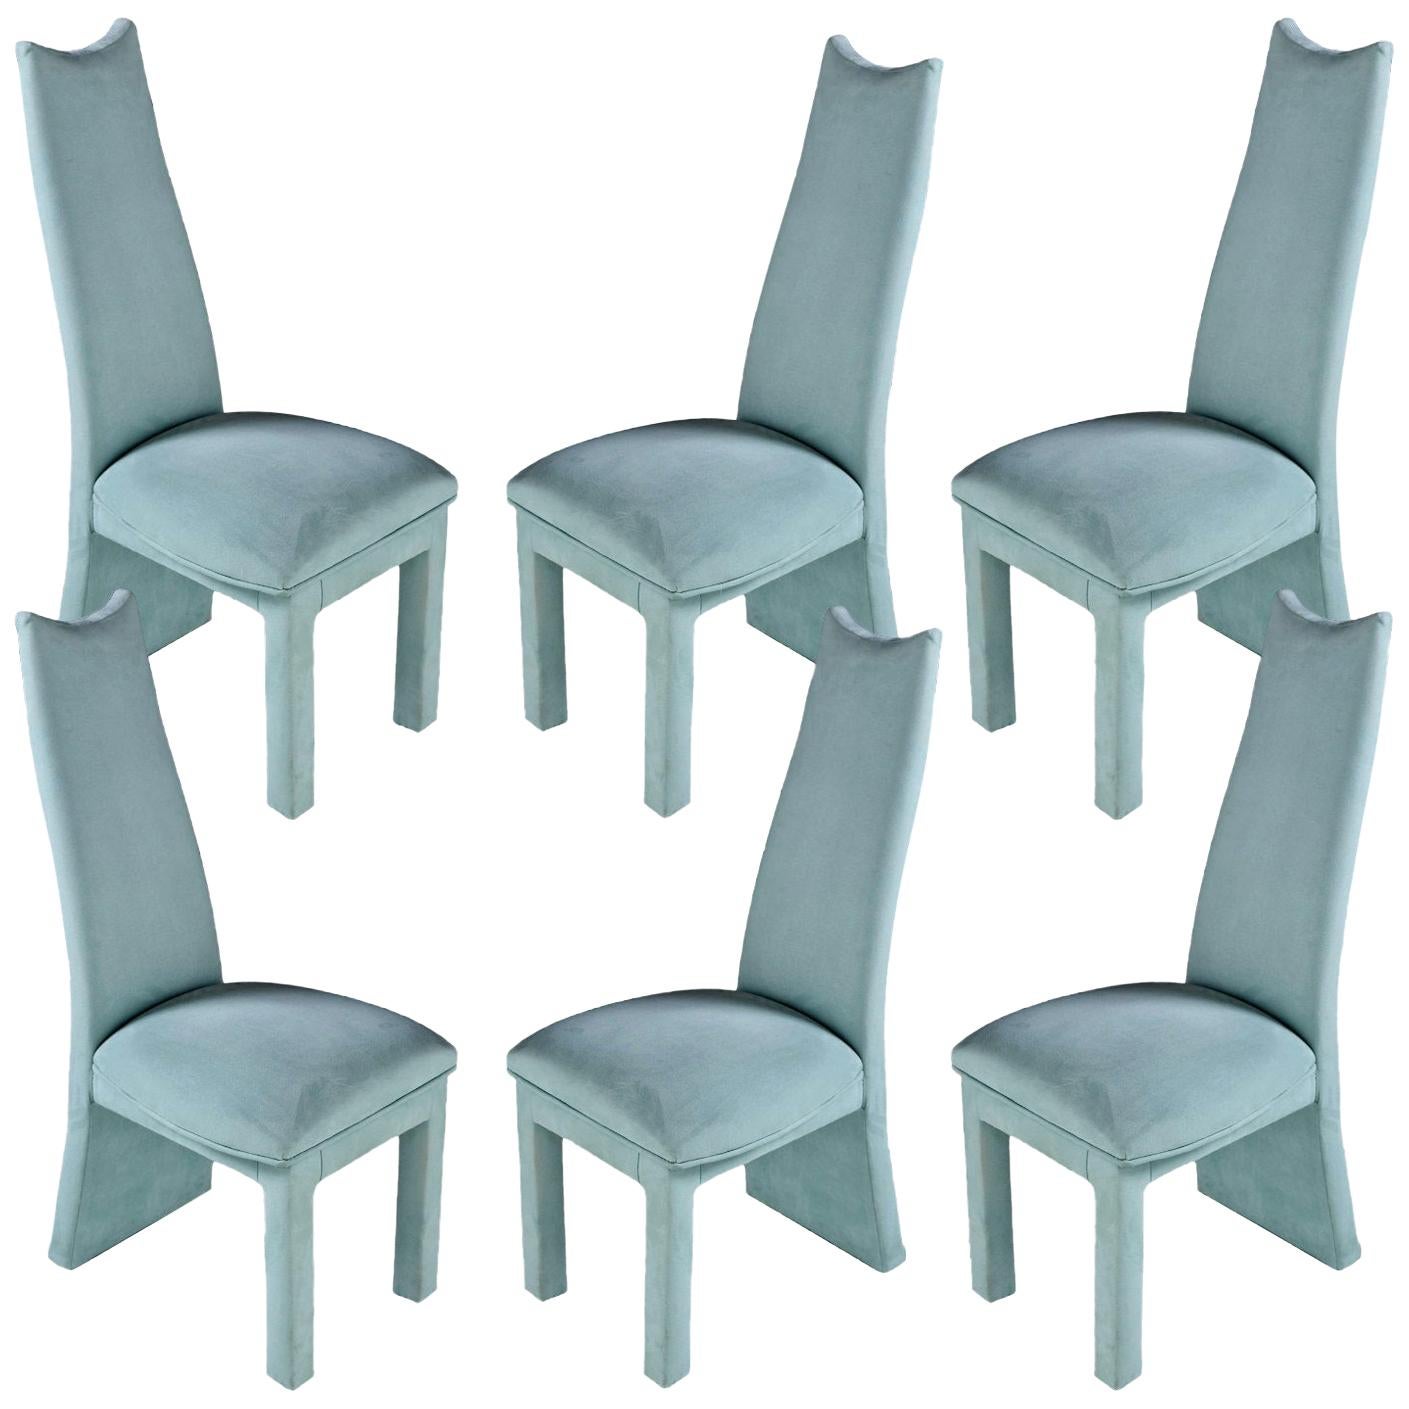 Deco Modern Seafoam Green Microfiber Upholstered High Back Dining Chairs